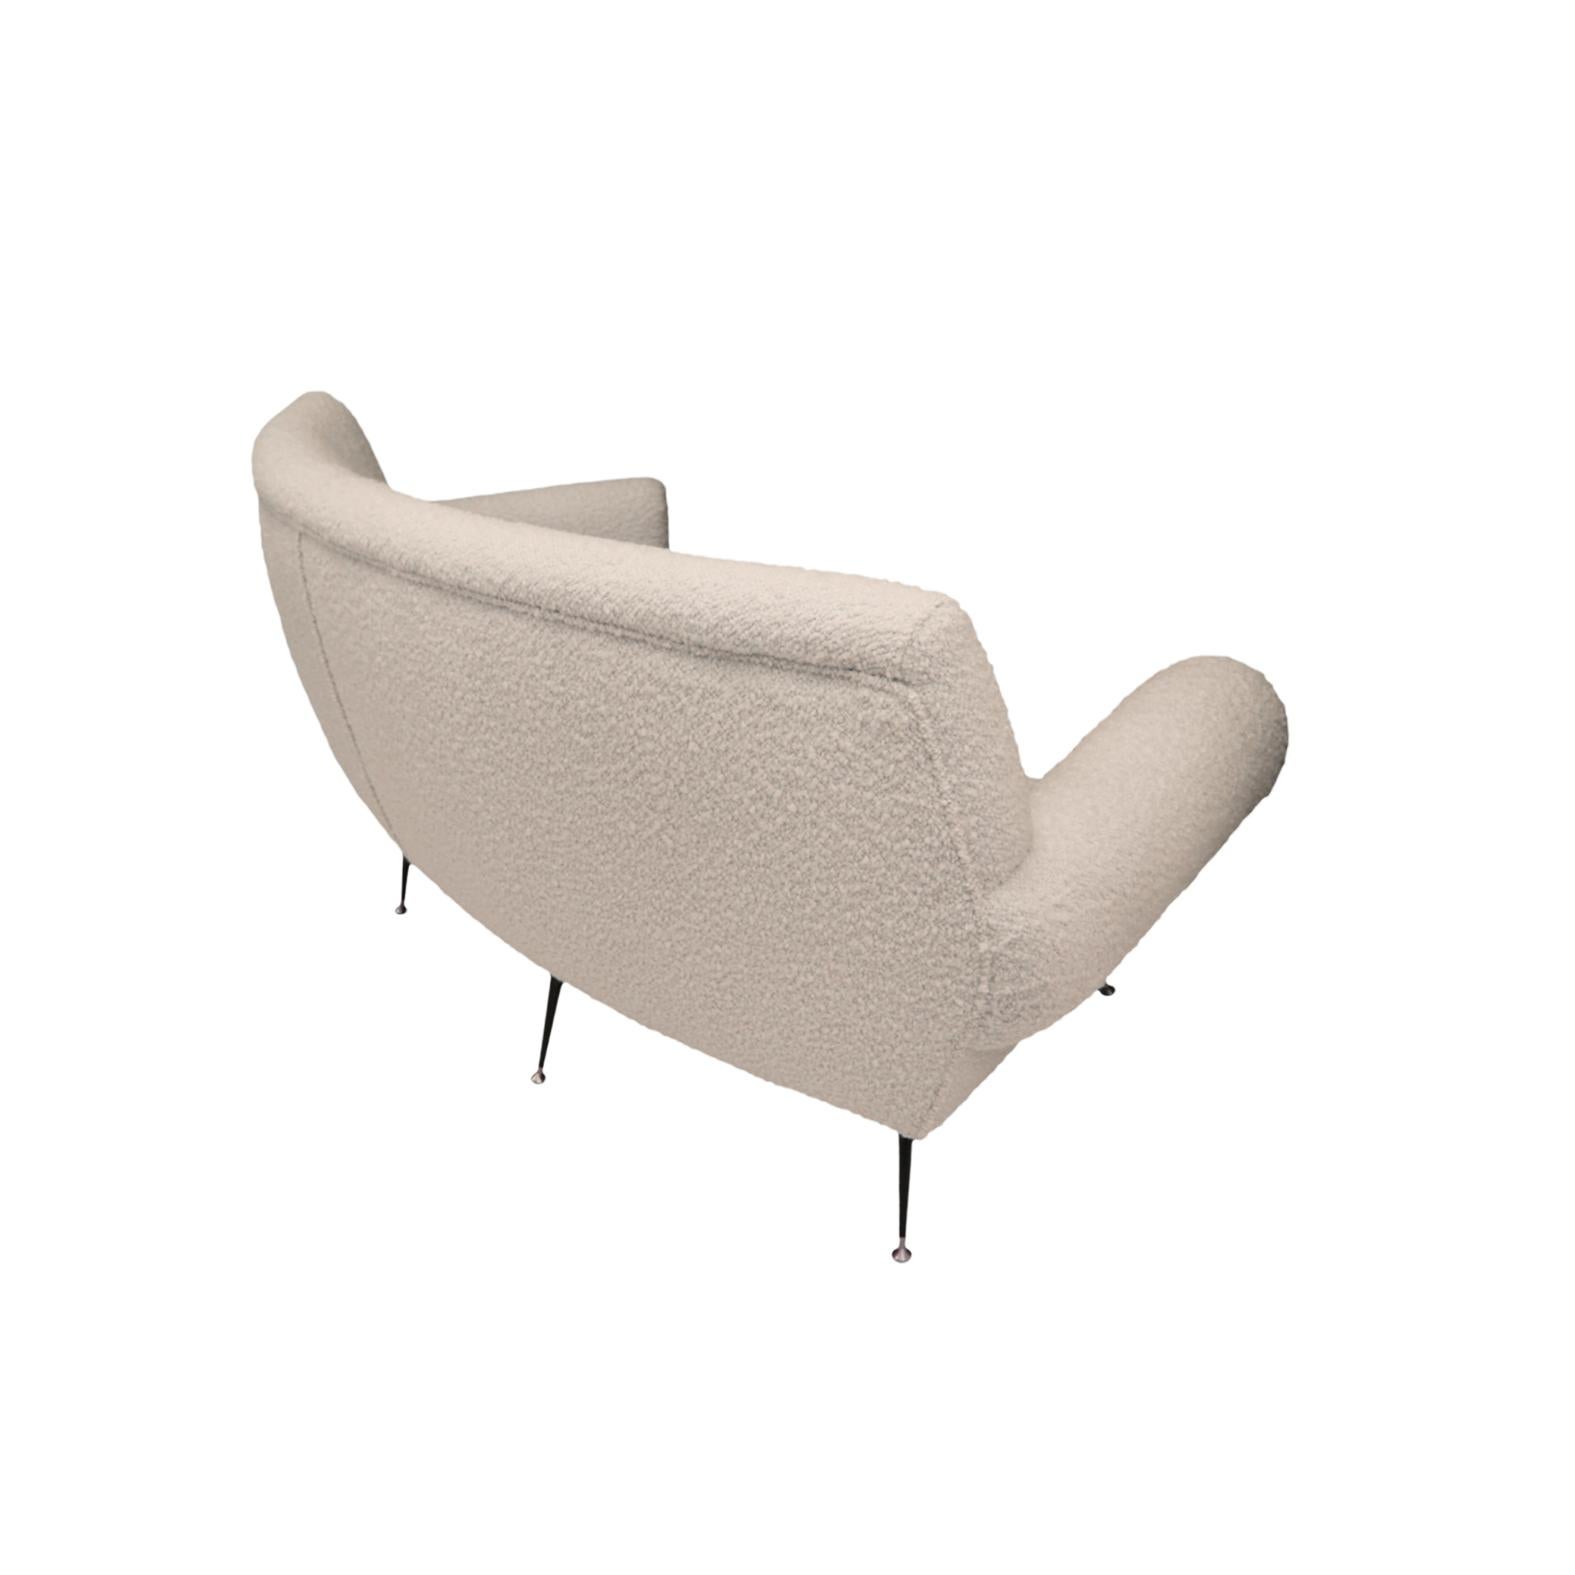 Italian Mid-Century White Boucle Curved Sofa with Six Legs by Gigi Radice for Minotti For Sale